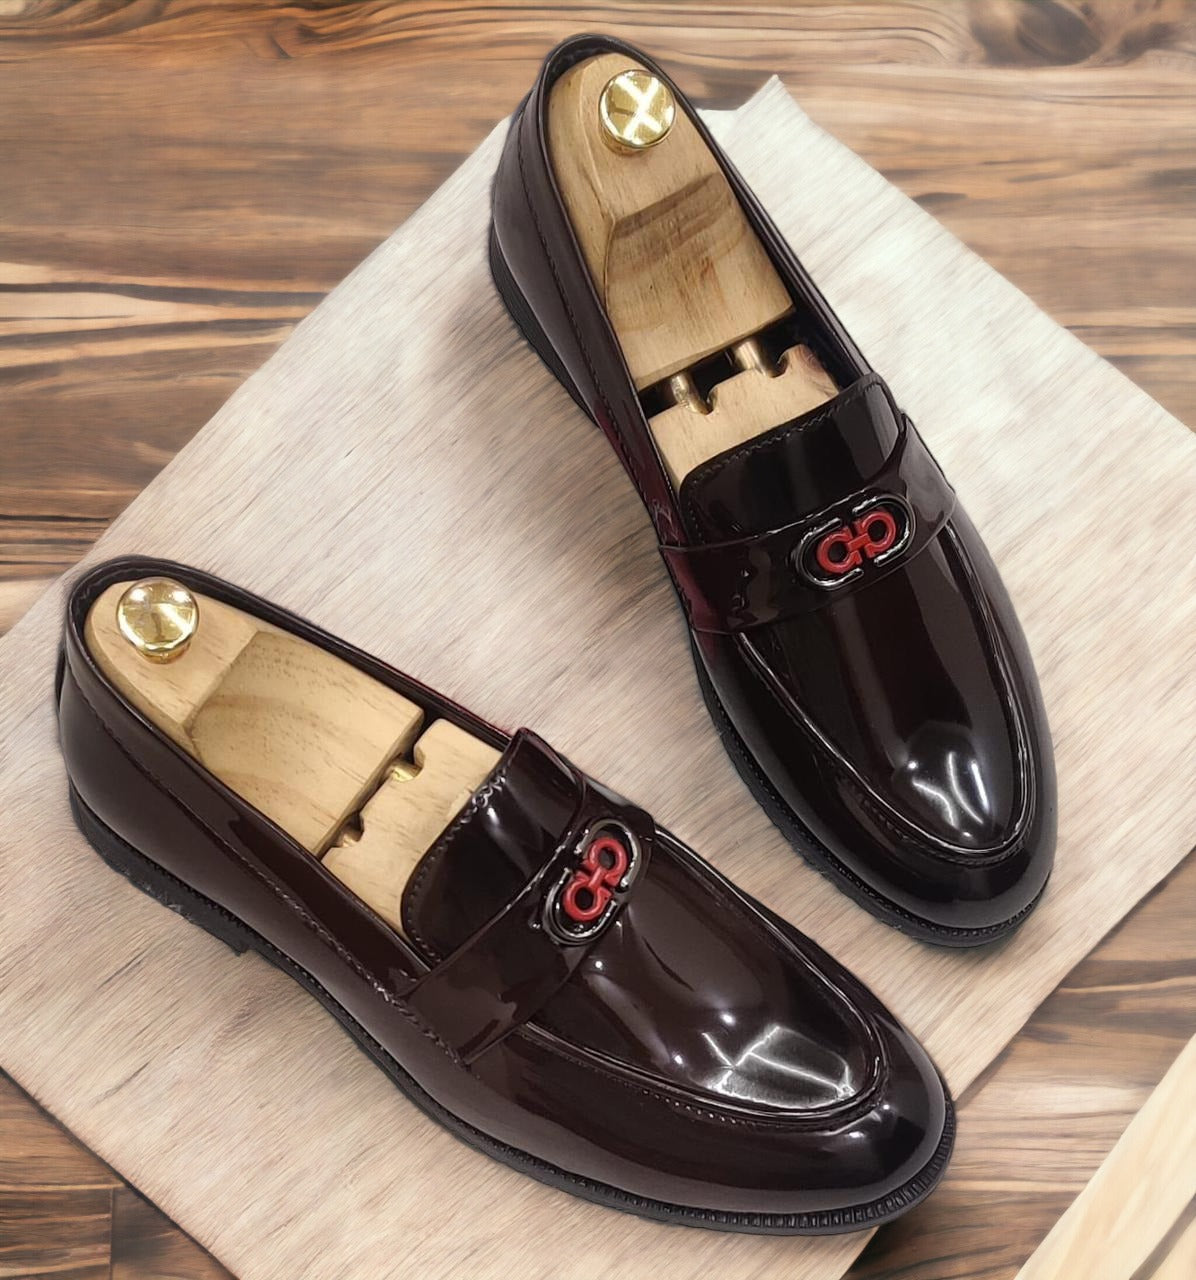 New Fashion Shiny Slip-On Loafer Shoes for Men